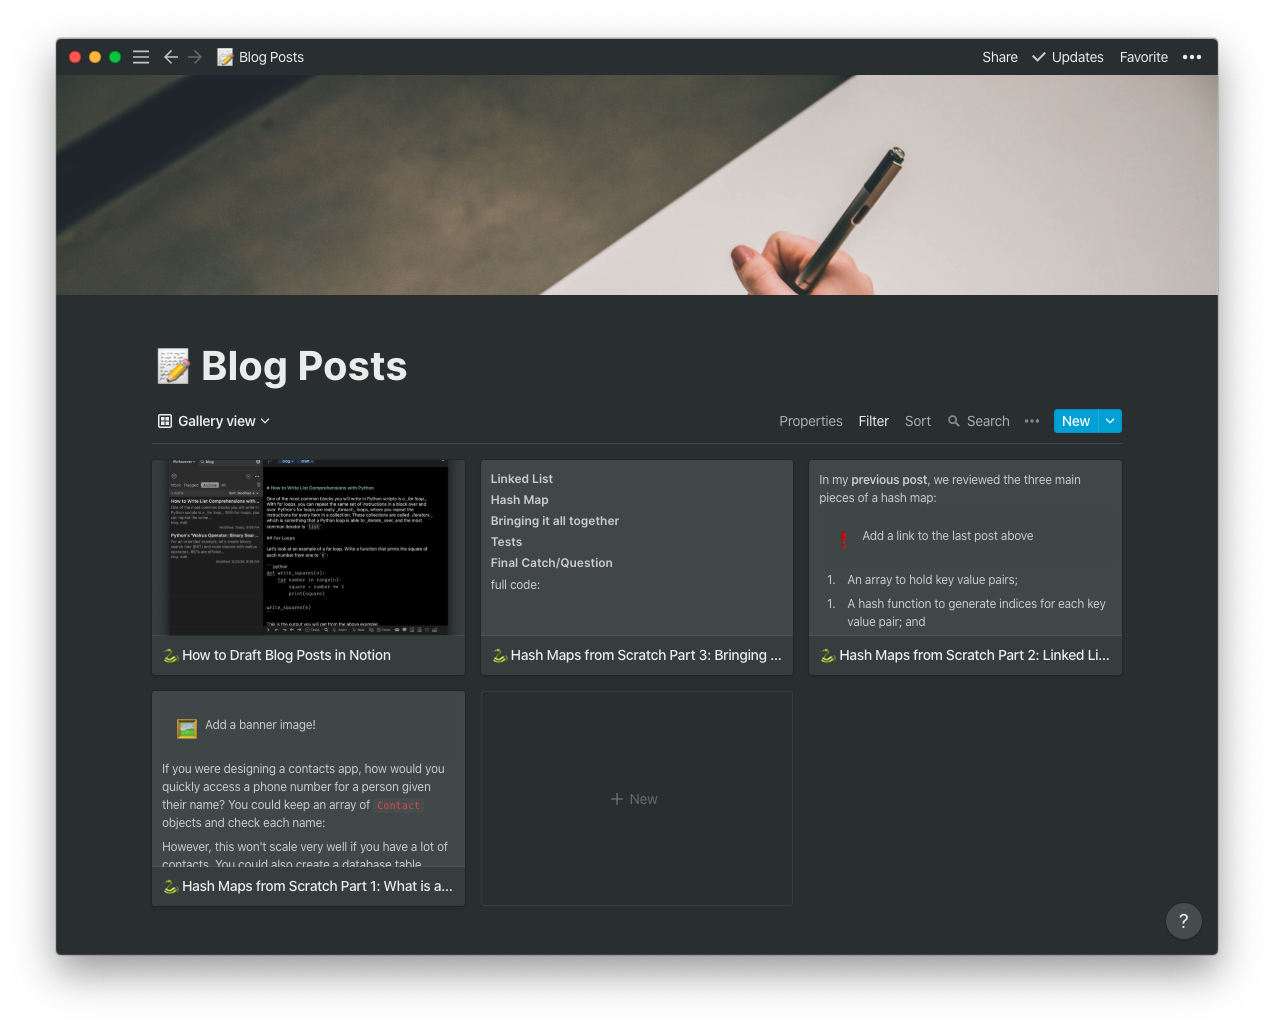 Gallery View of My Blog Posts